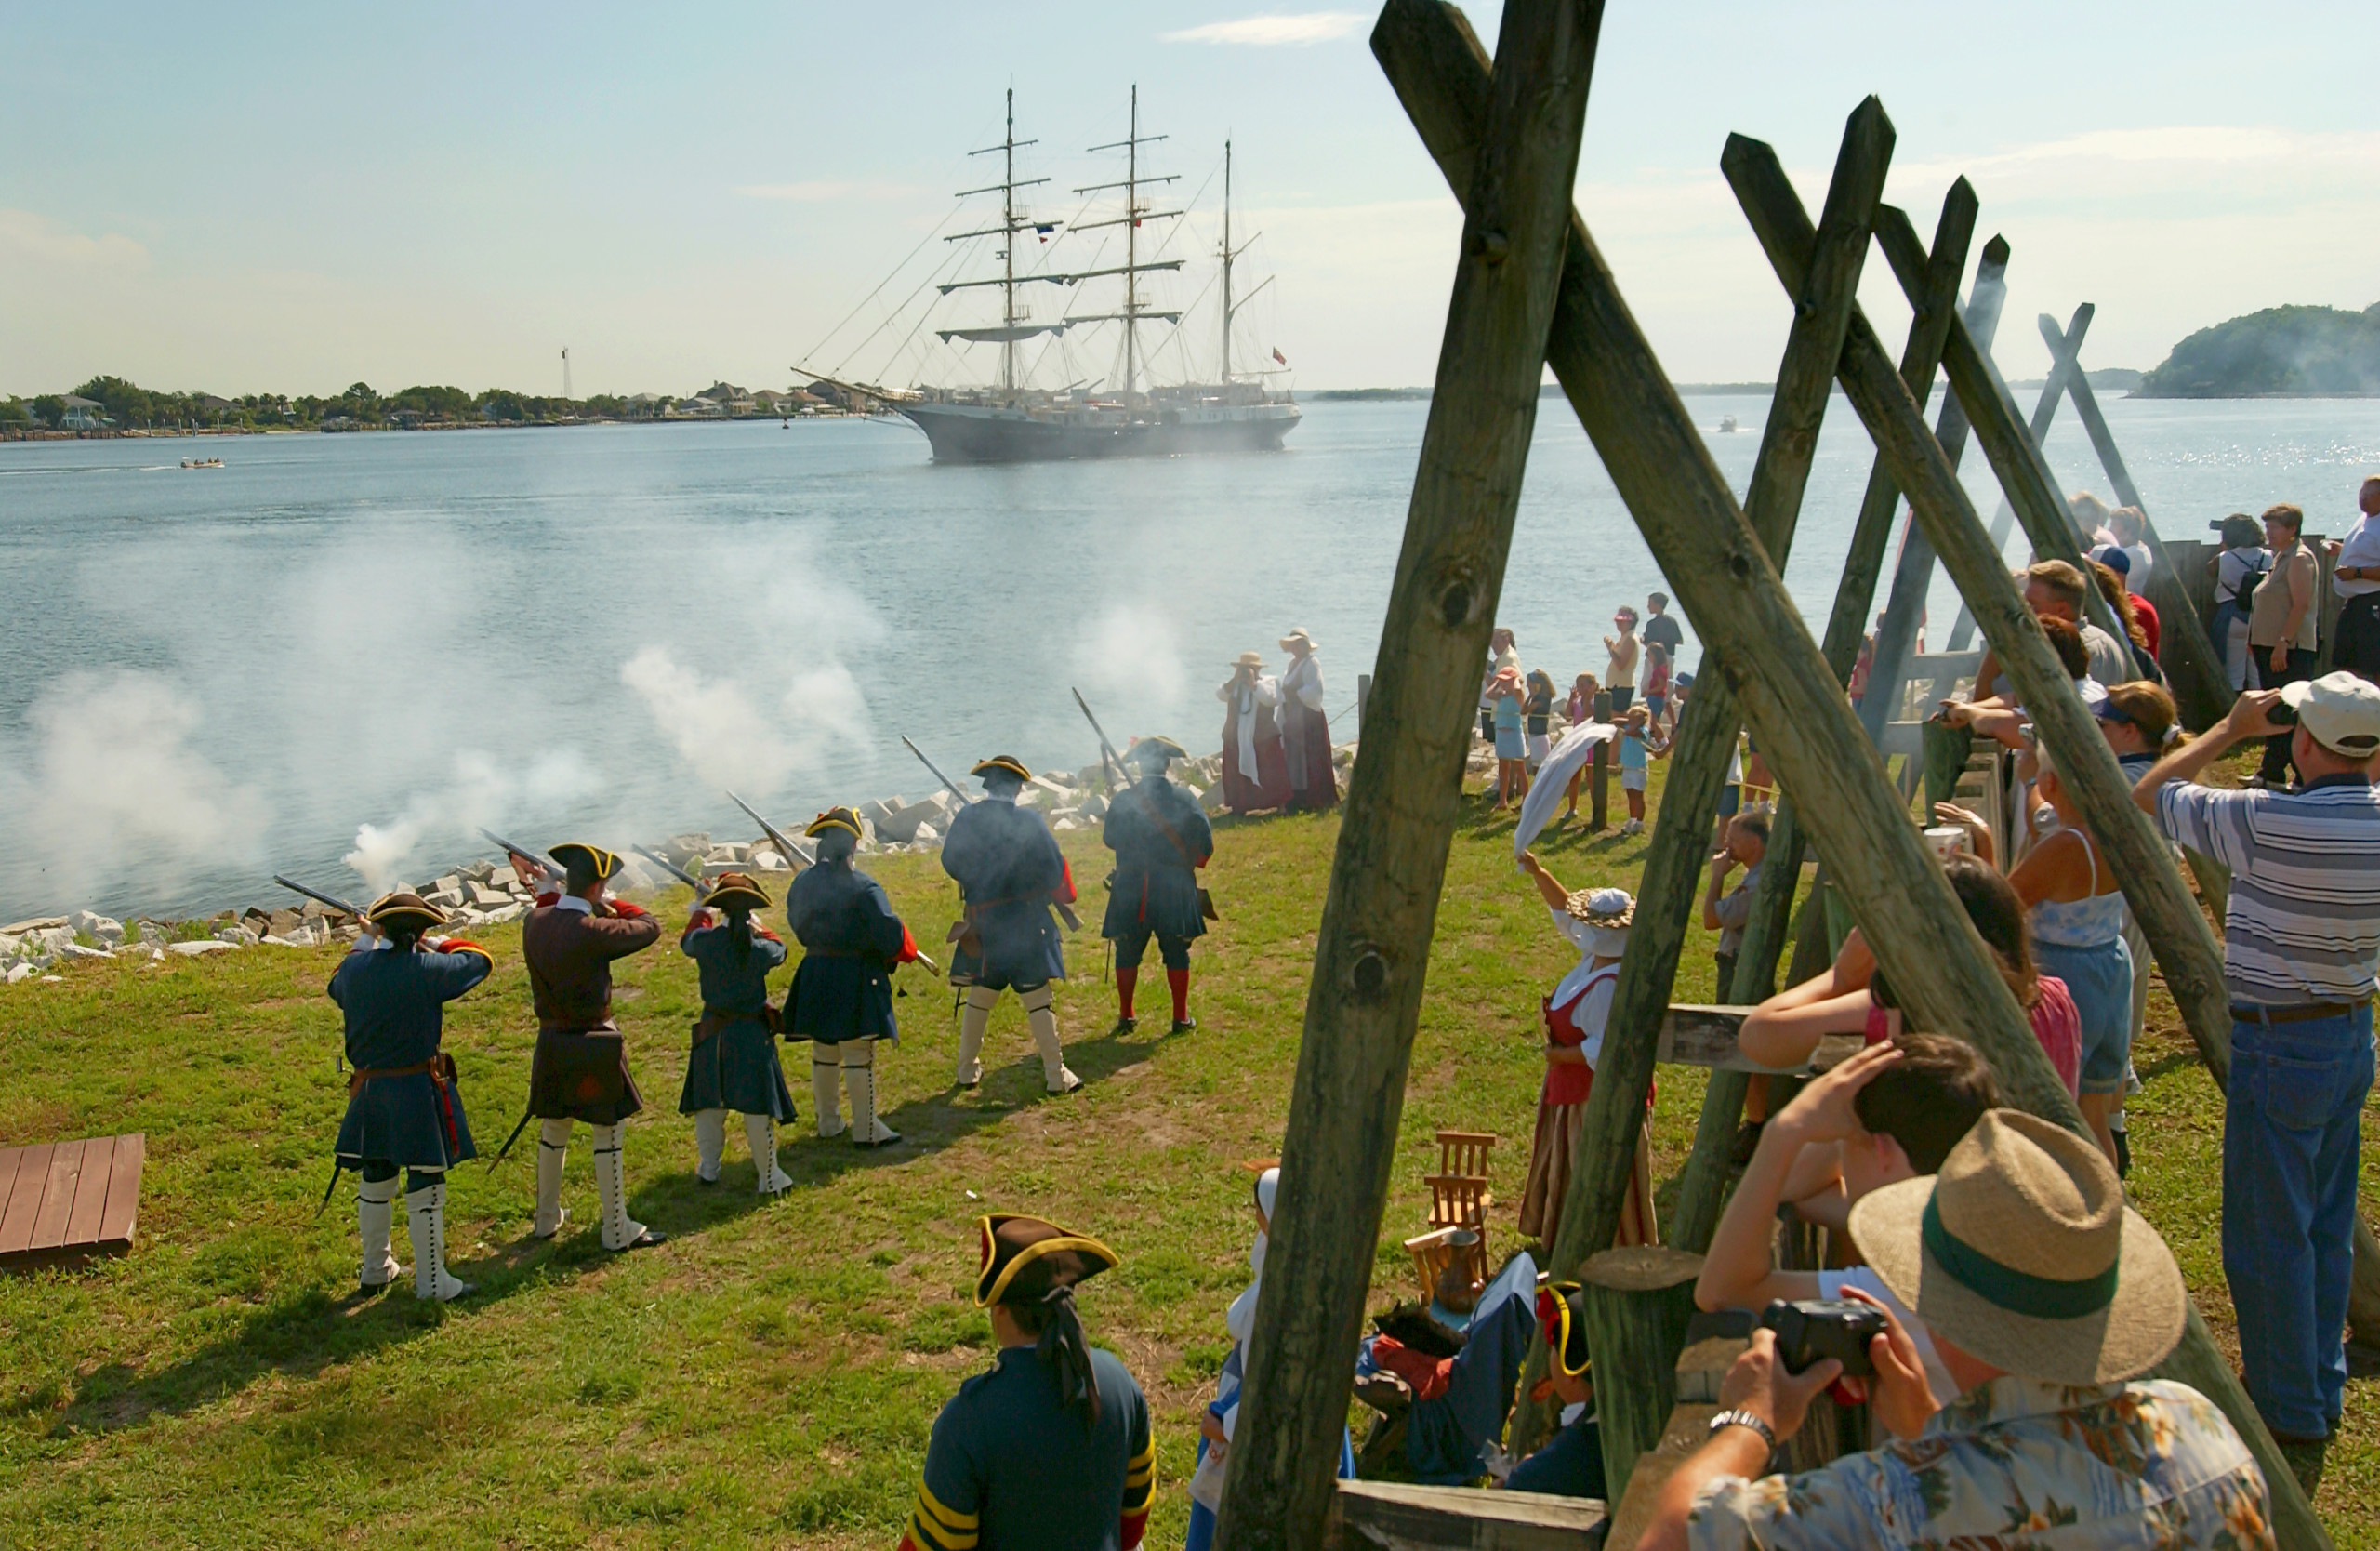 Photo courtesy WillDickey.com--06/10/04--Re-enactors fire a rifle salute to a tall ship on the St. Johns River as it passes by Fort Caroline during the Sail Jacksonville celebration June 10, 2004.  (www.willdickey.com)